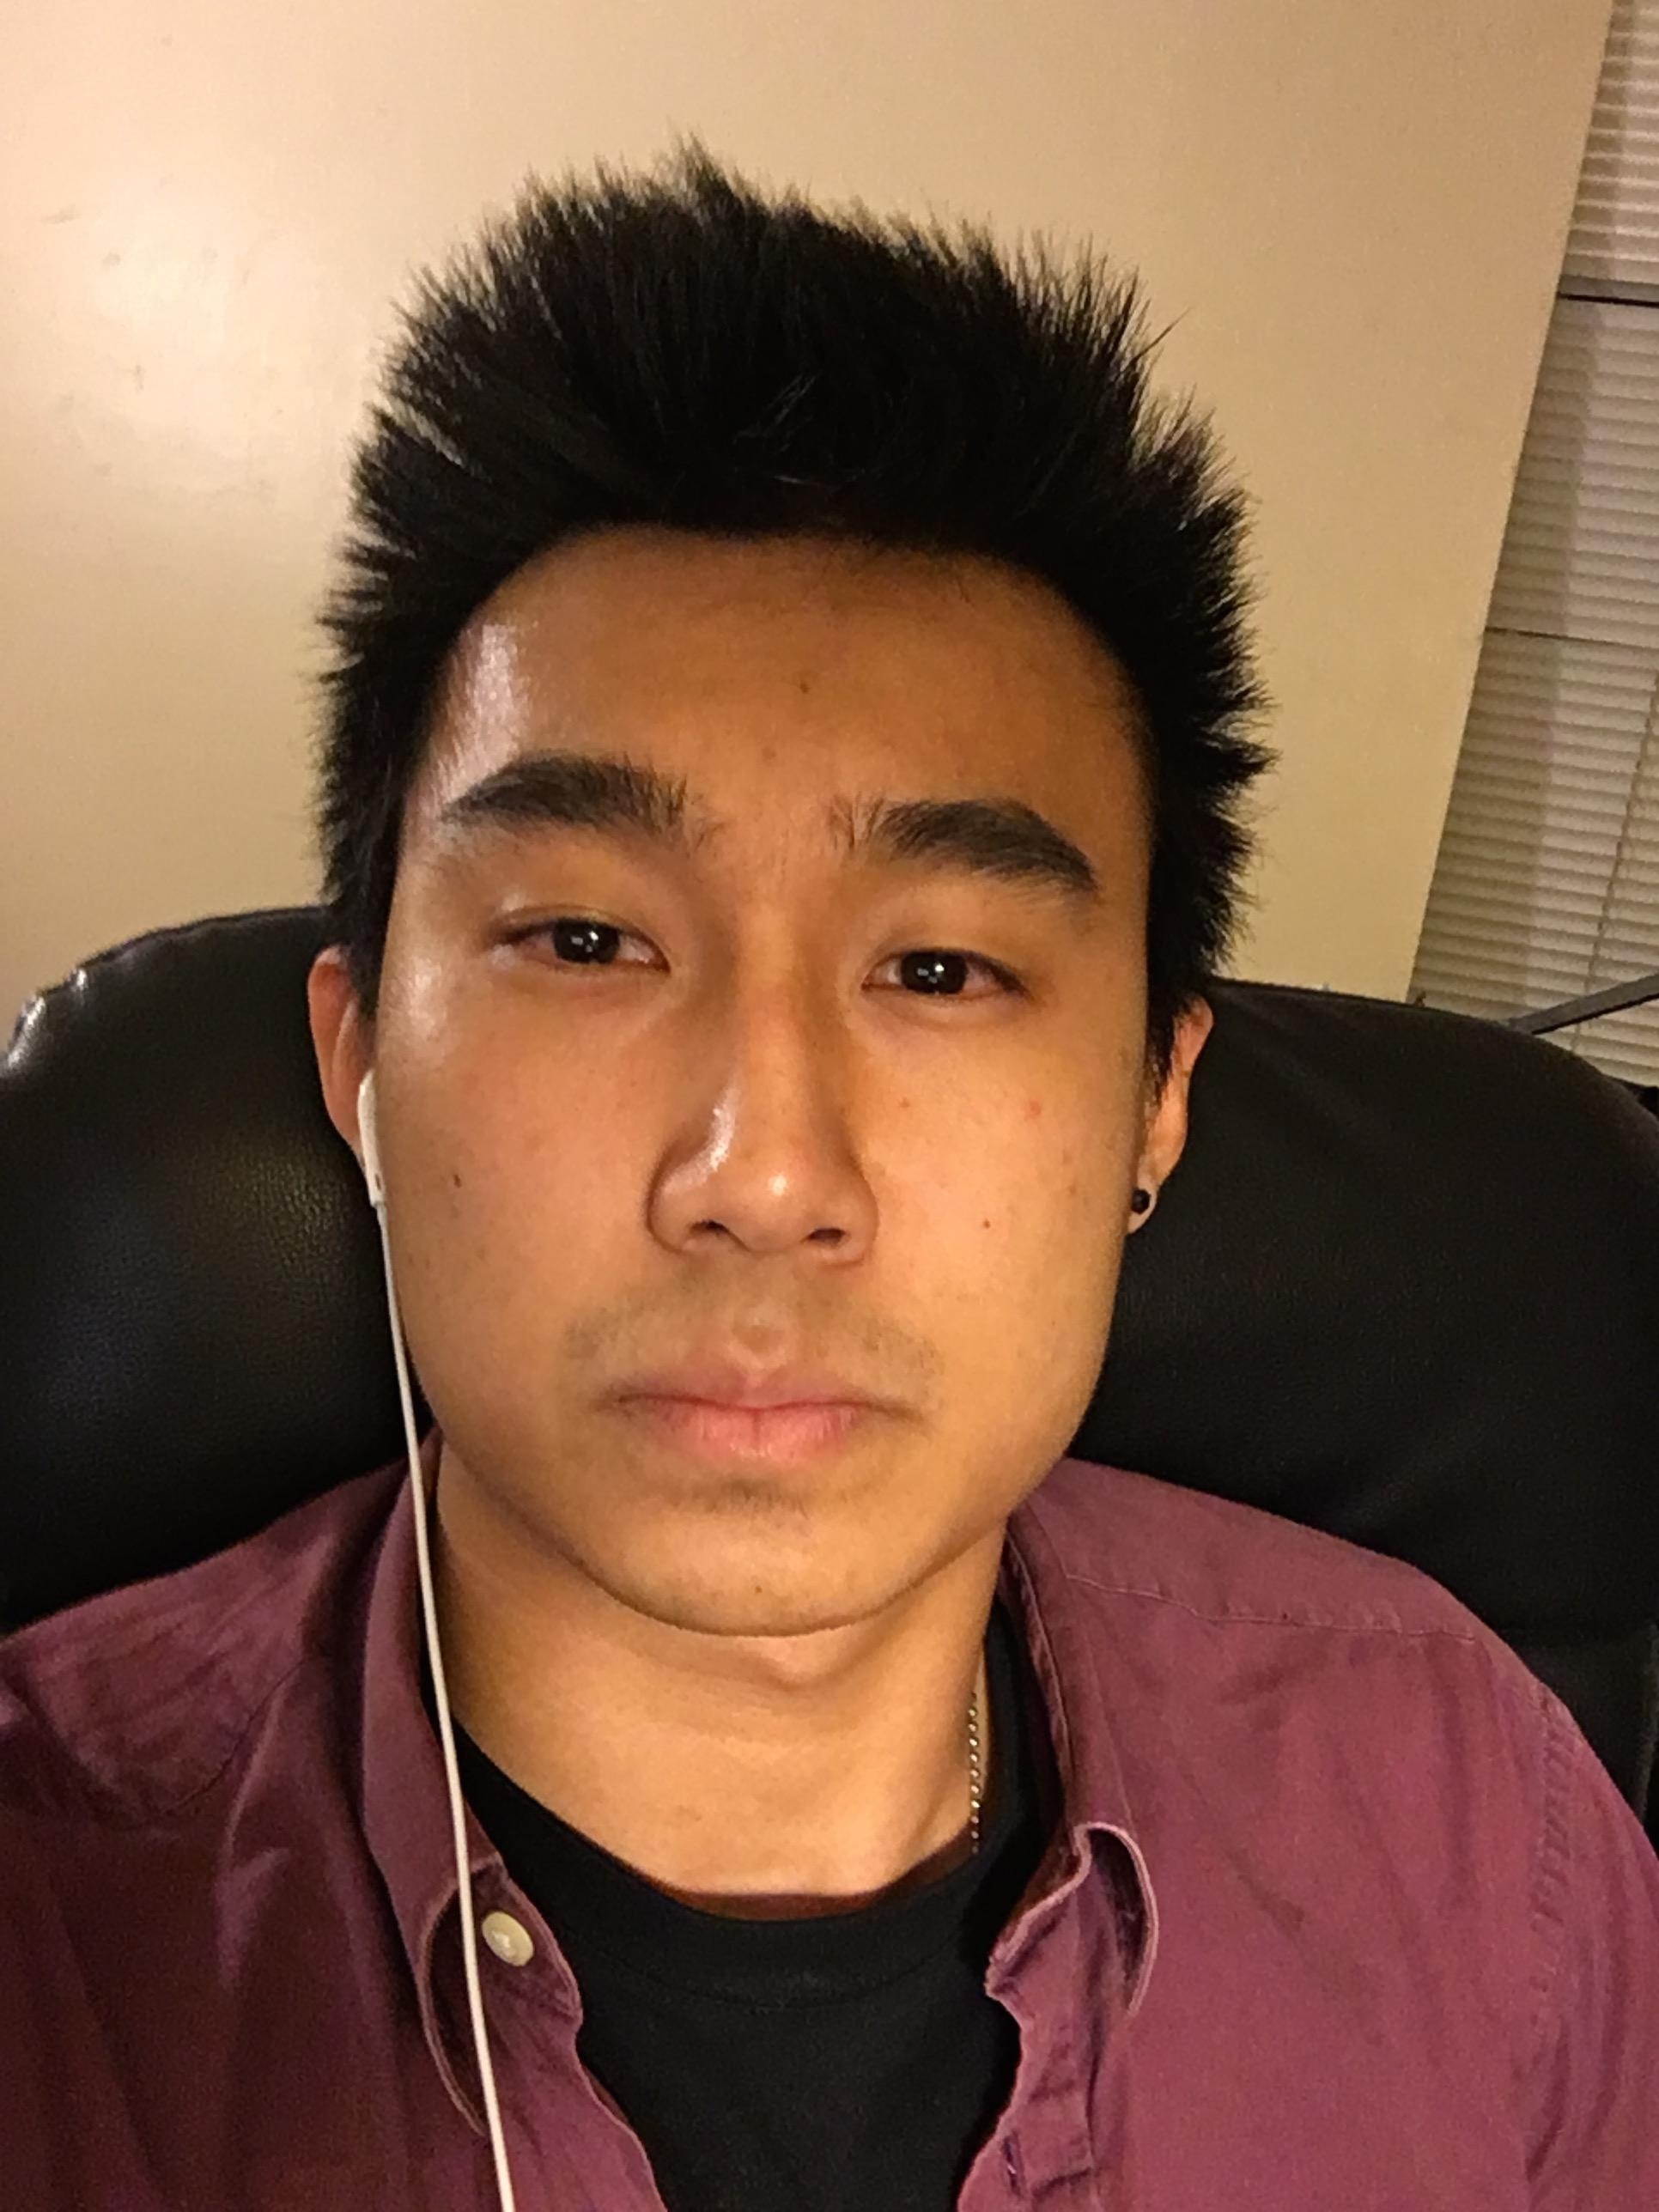 Asian Boy Needs New Hair Style That's Not High Maintenance. Thanks with Best Asian Male Hairstyles Reddit